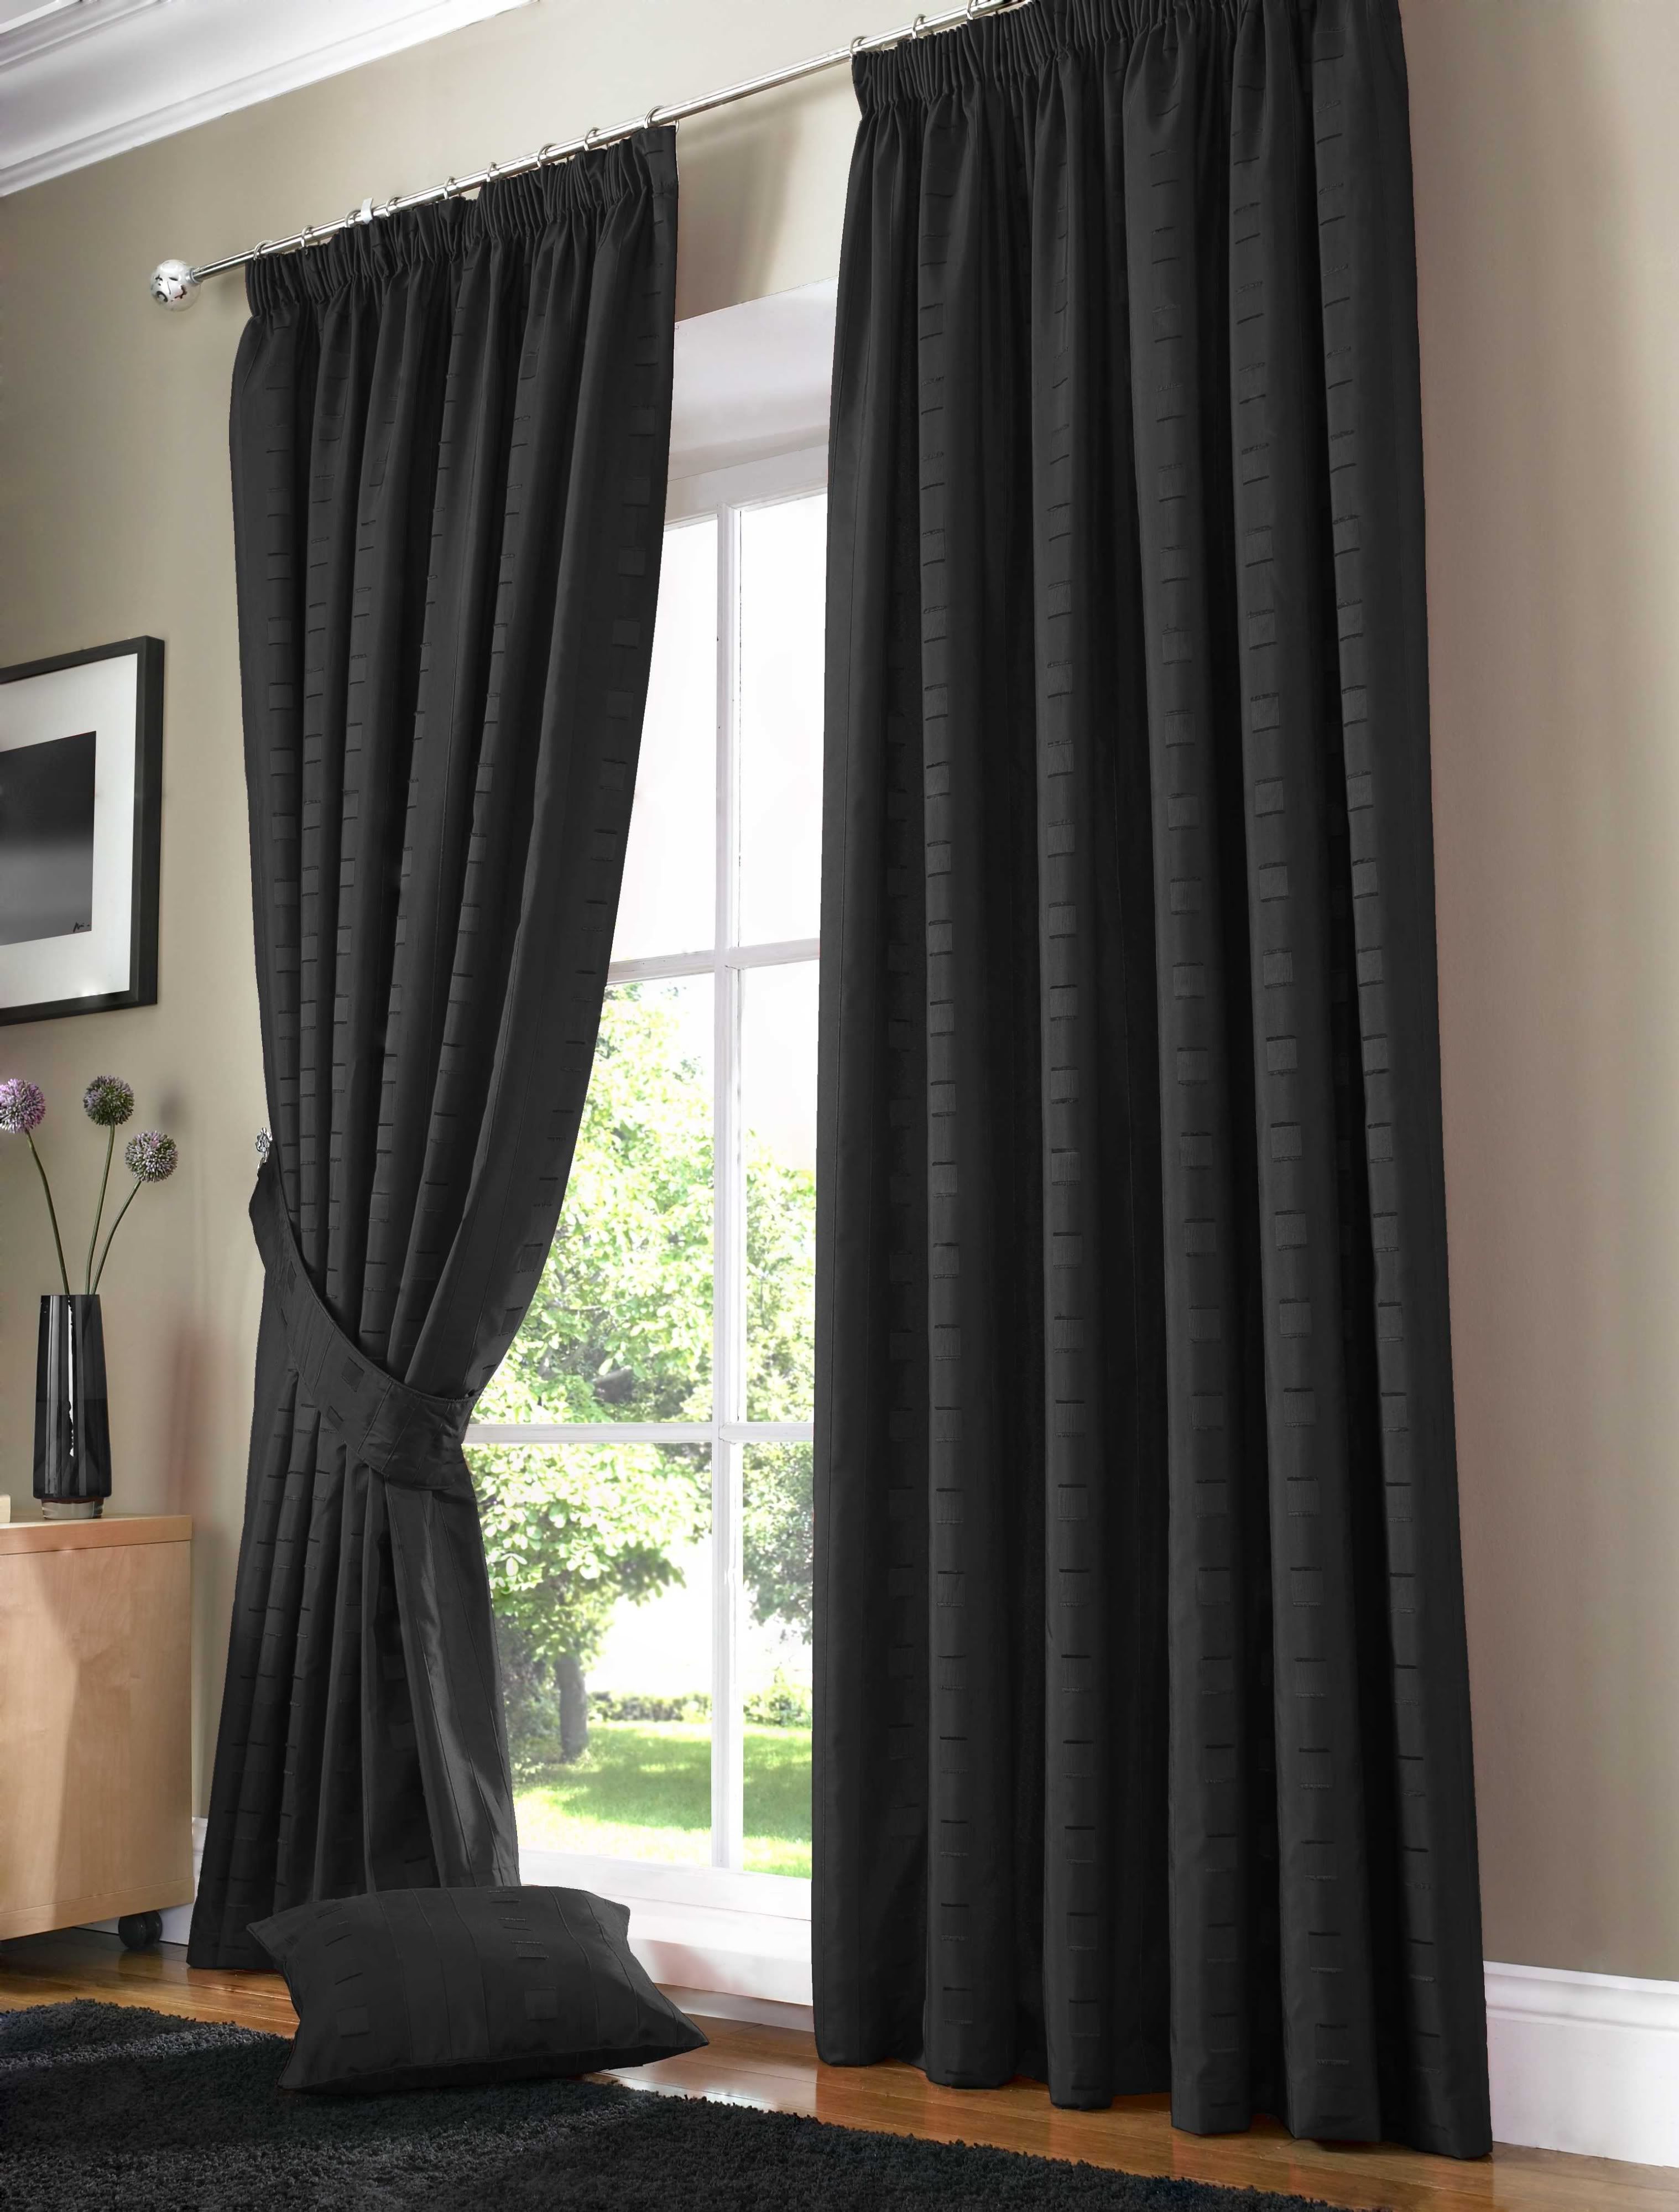 Curtains Gray And Black Curtains Ideas 25 Best About Dark Grey On With Regard To Dark Grey Sheer Curtains (View 14 of 25)